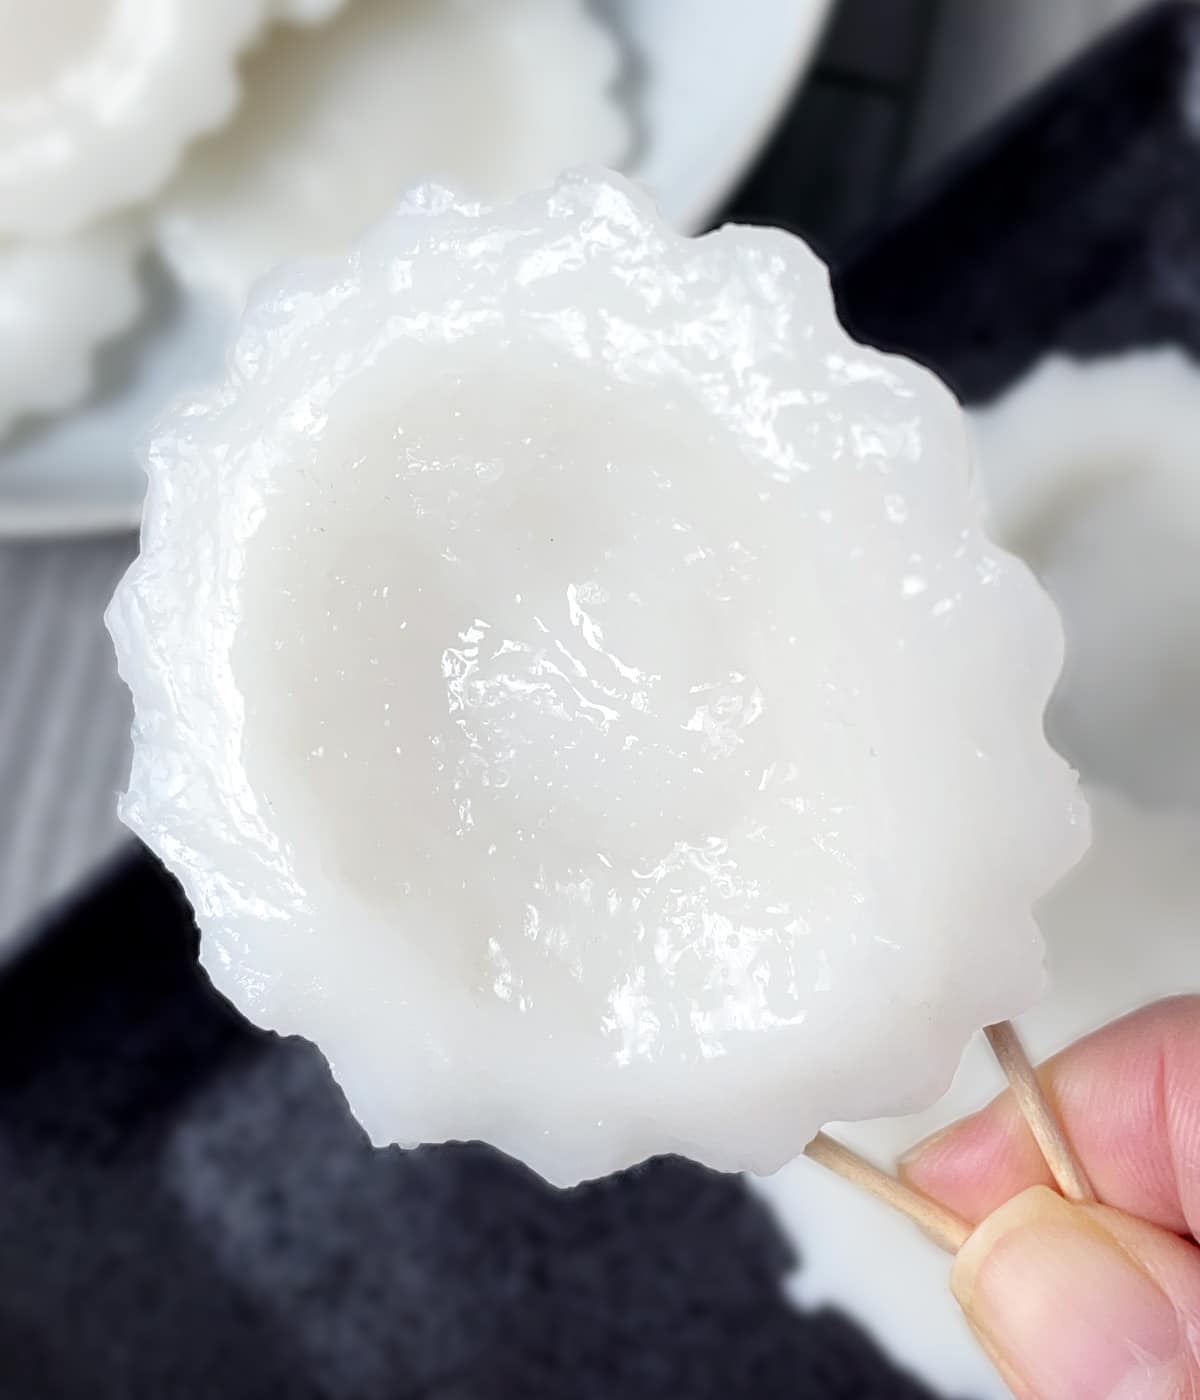 A hand holding toothpicks holding a white round jelly.